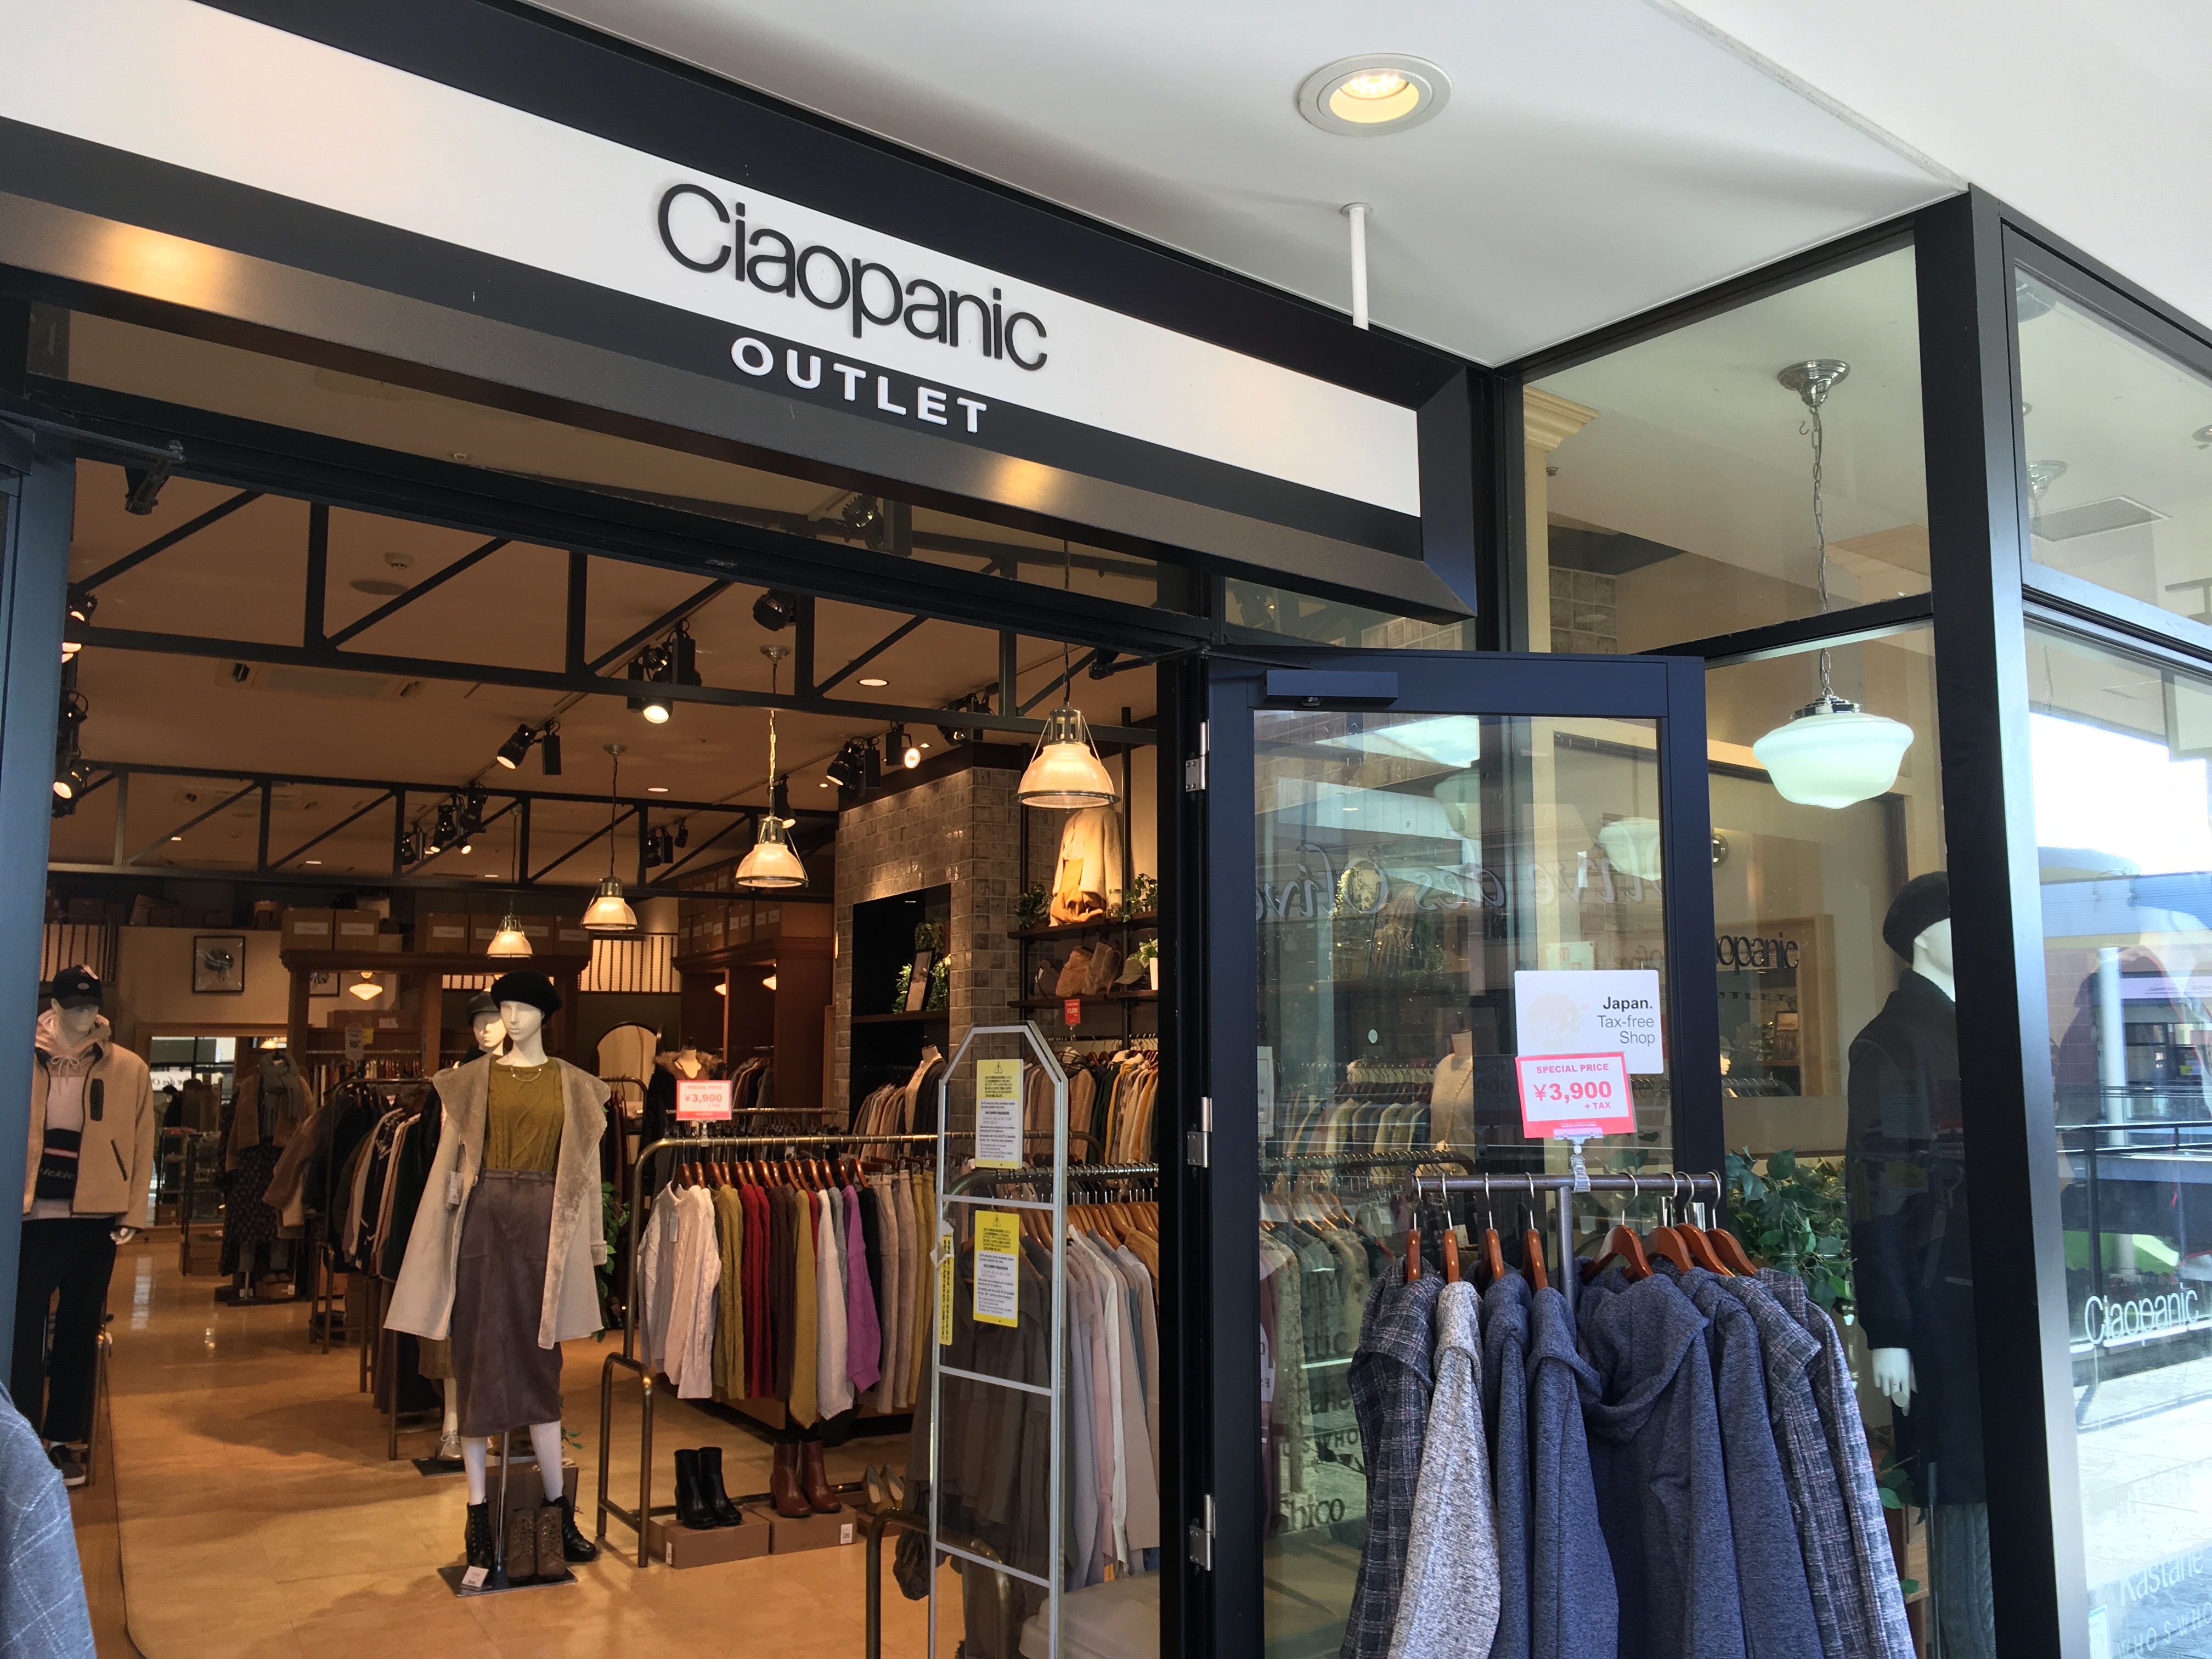 Ciaopanic Outlet 三井アウトレットパーク 入間